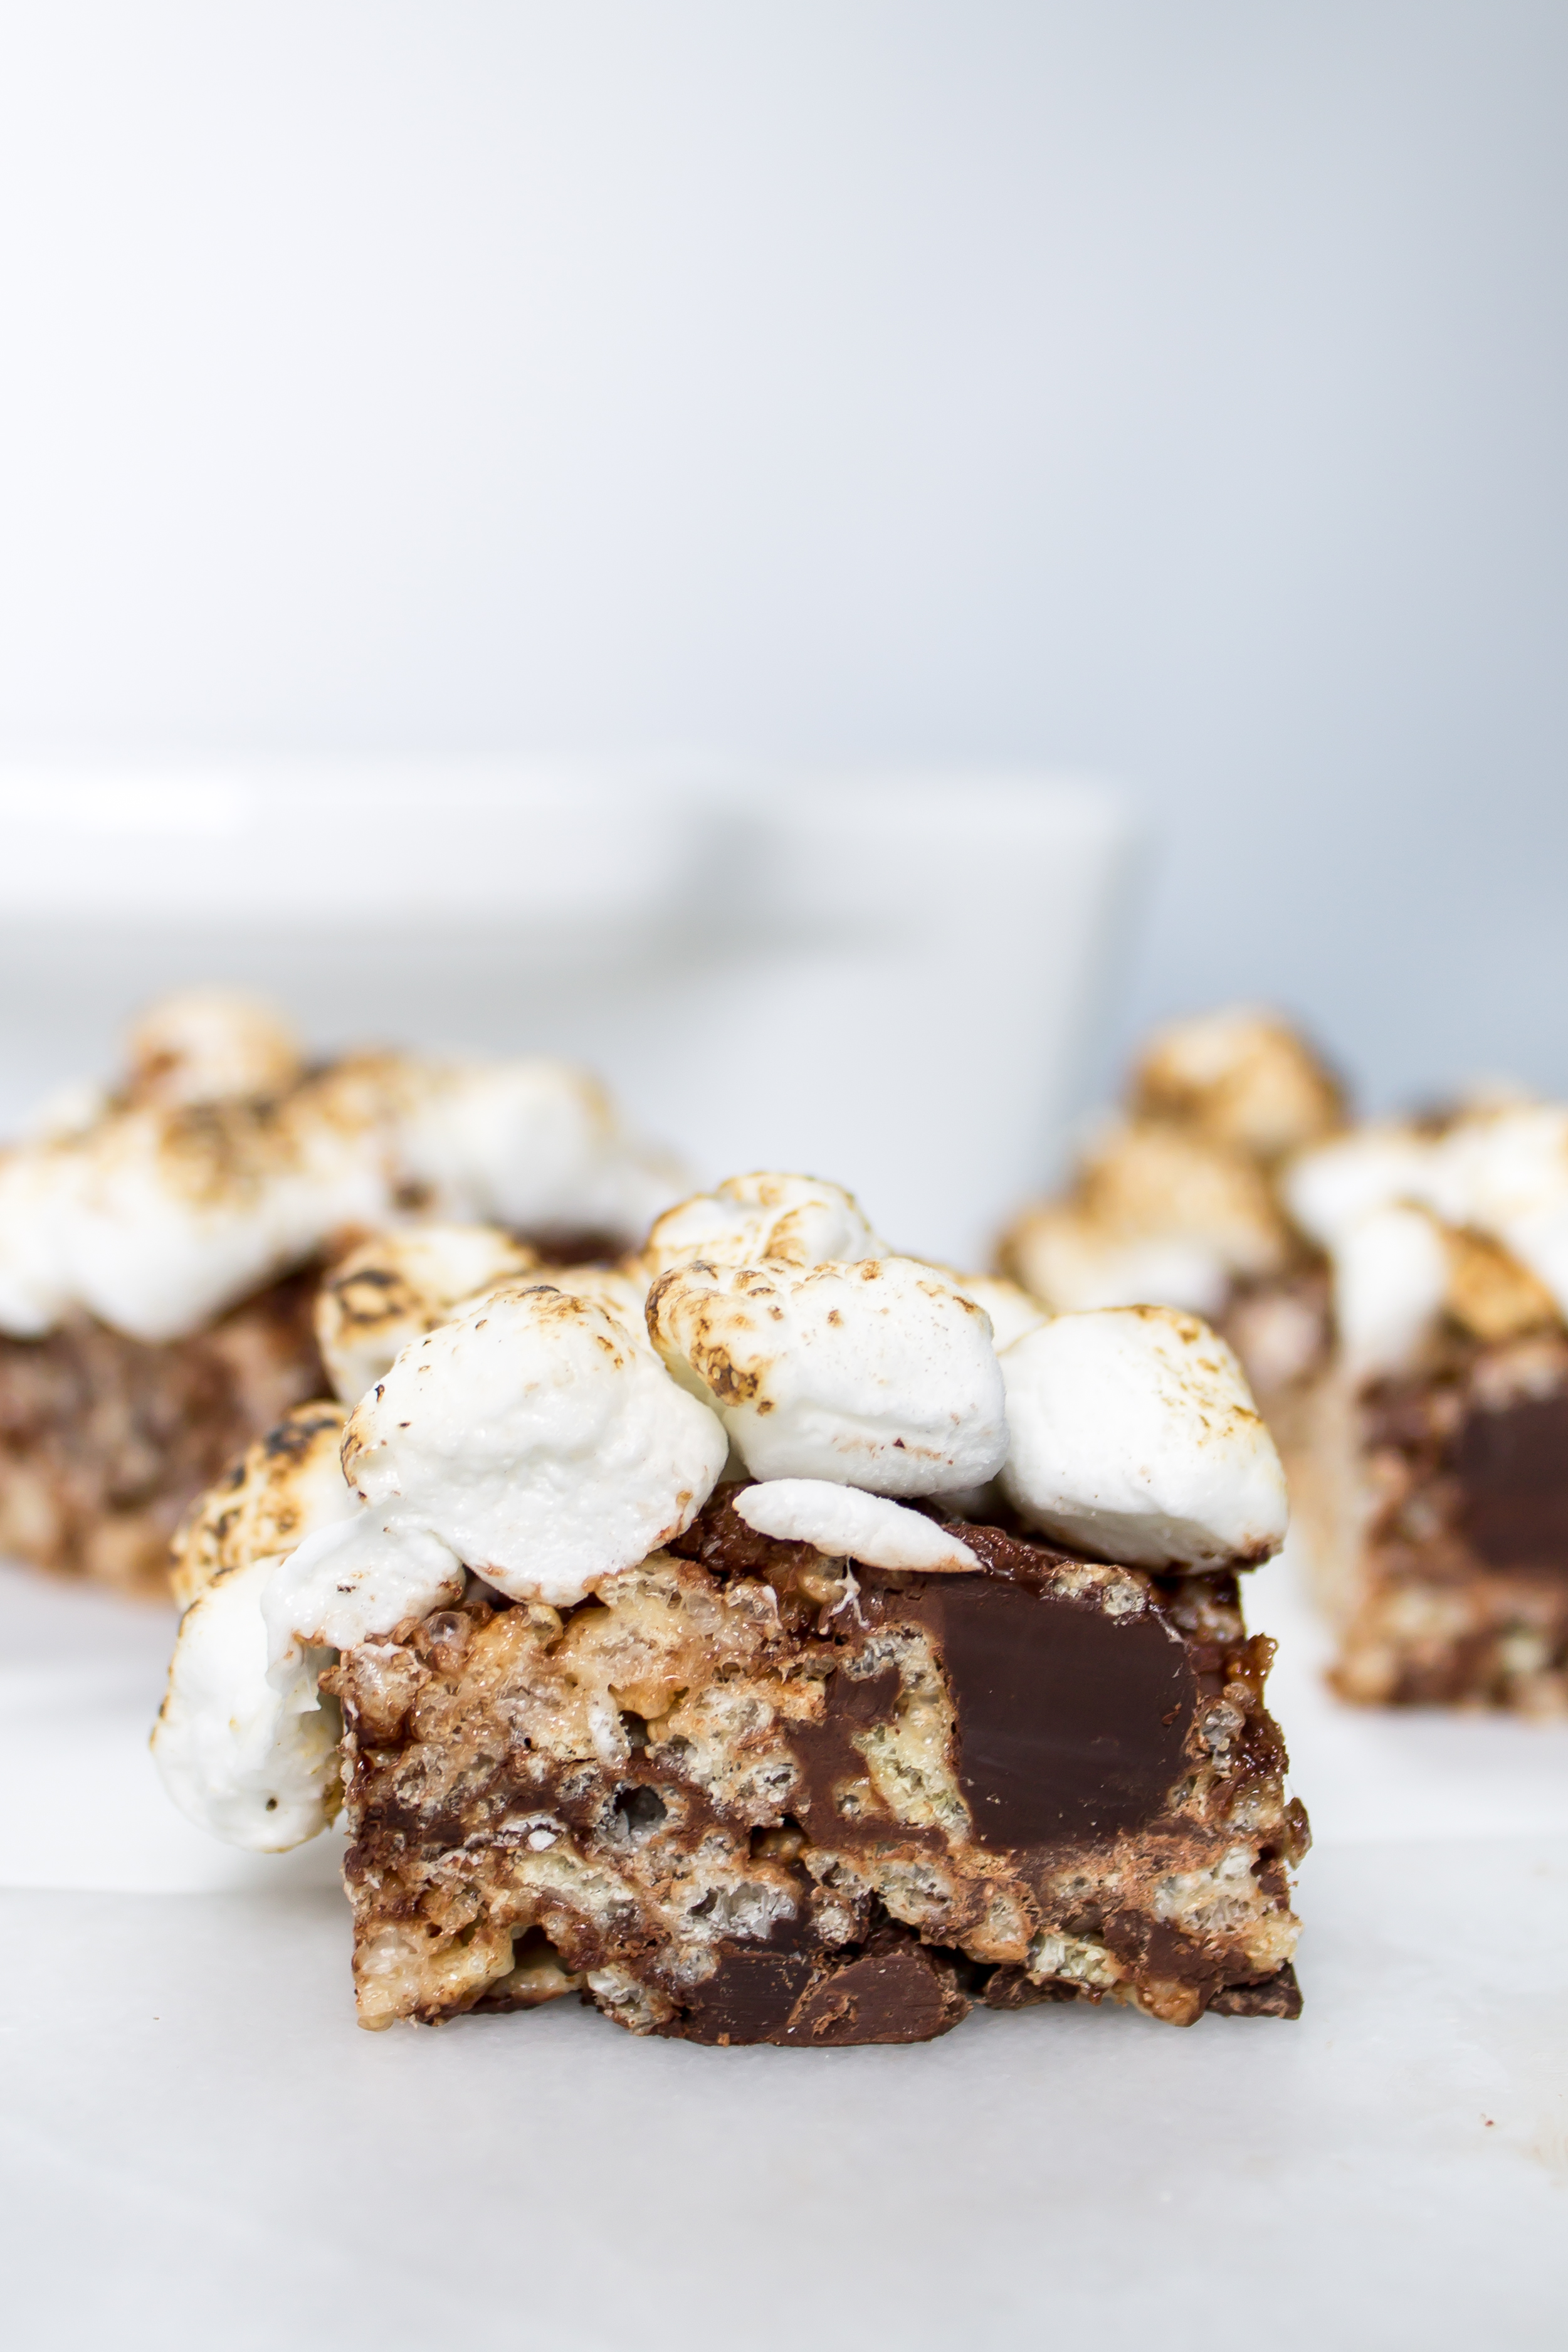 S'mores rice krispie treats are the easiest no-bake treat to make when you want that campfire s'mores taste without the hassle. | Pass the Cookies | www.passthecookies.com